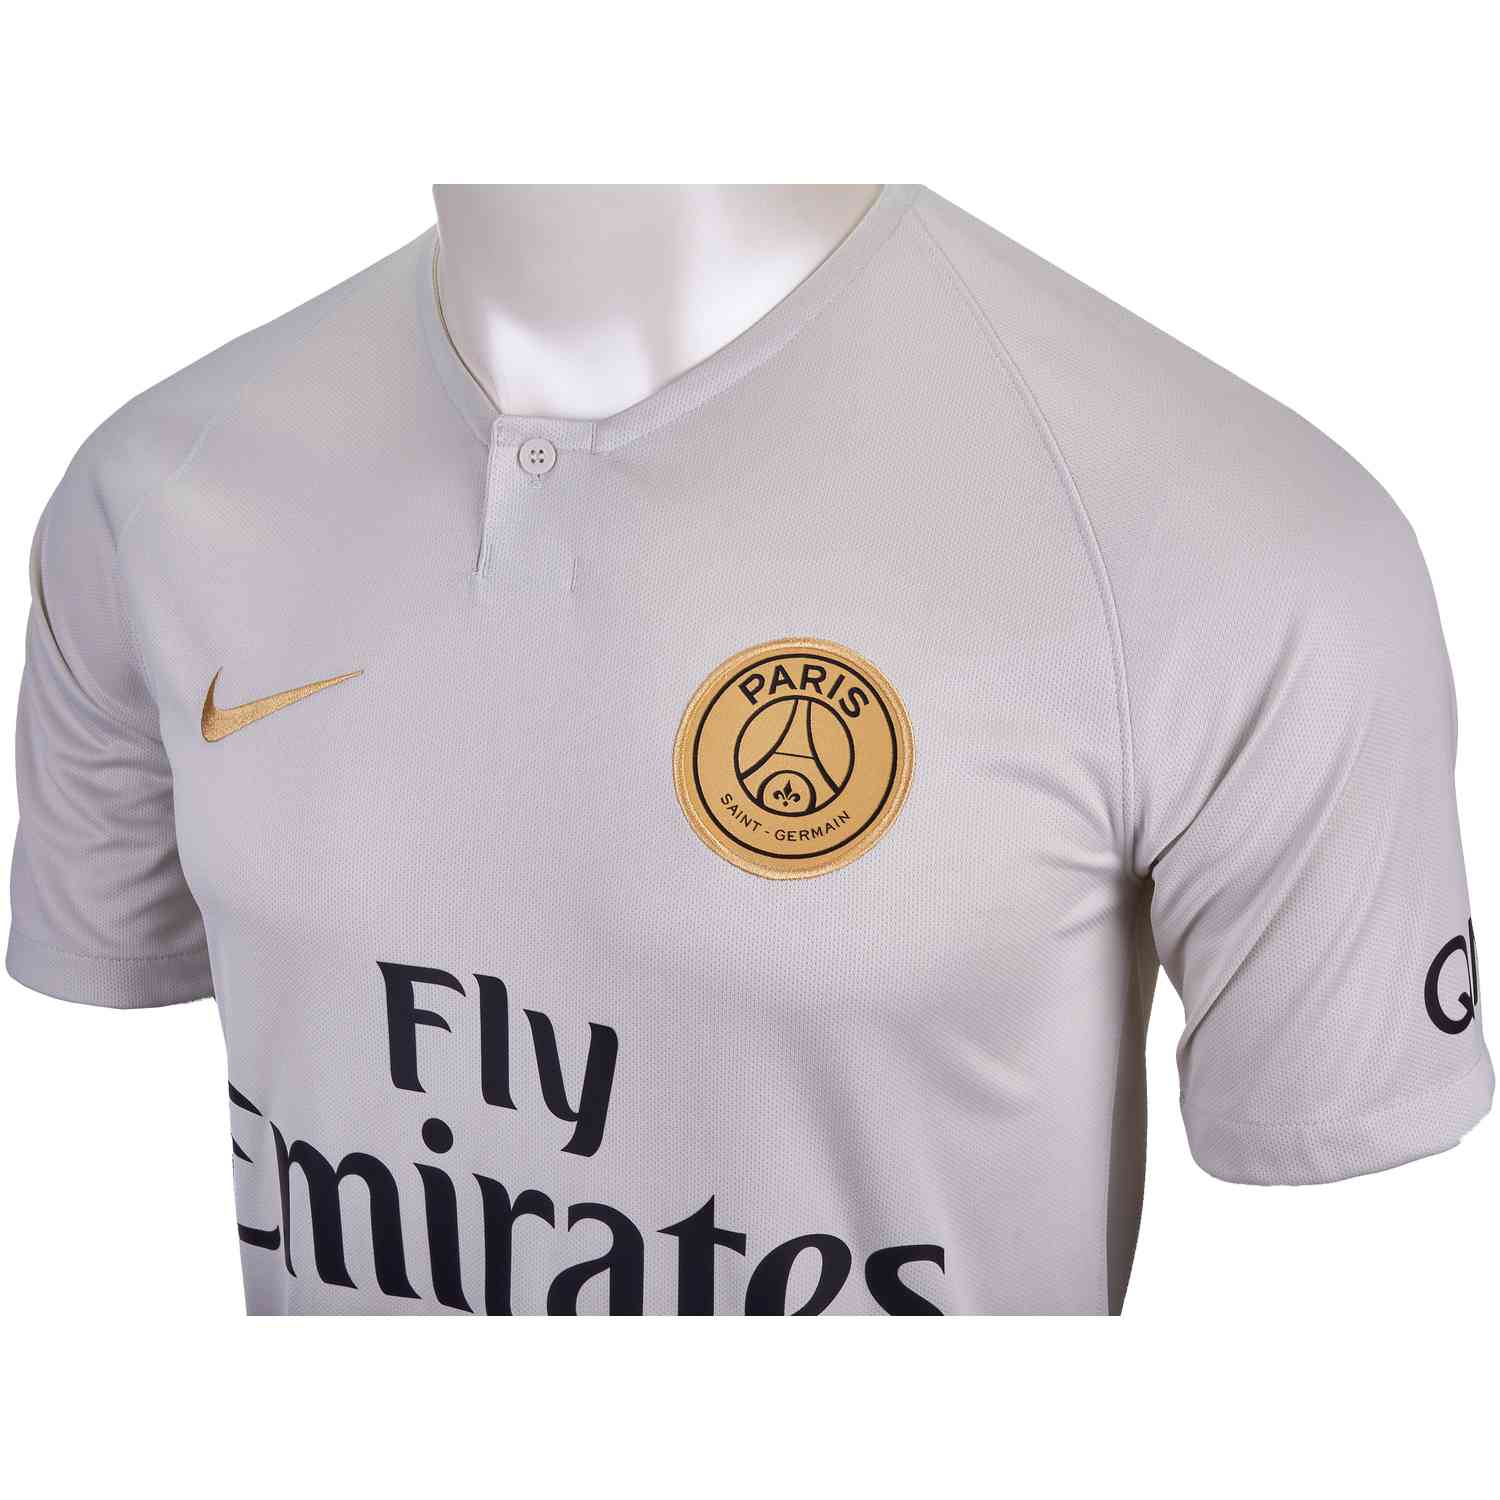 psg jersey white and gold